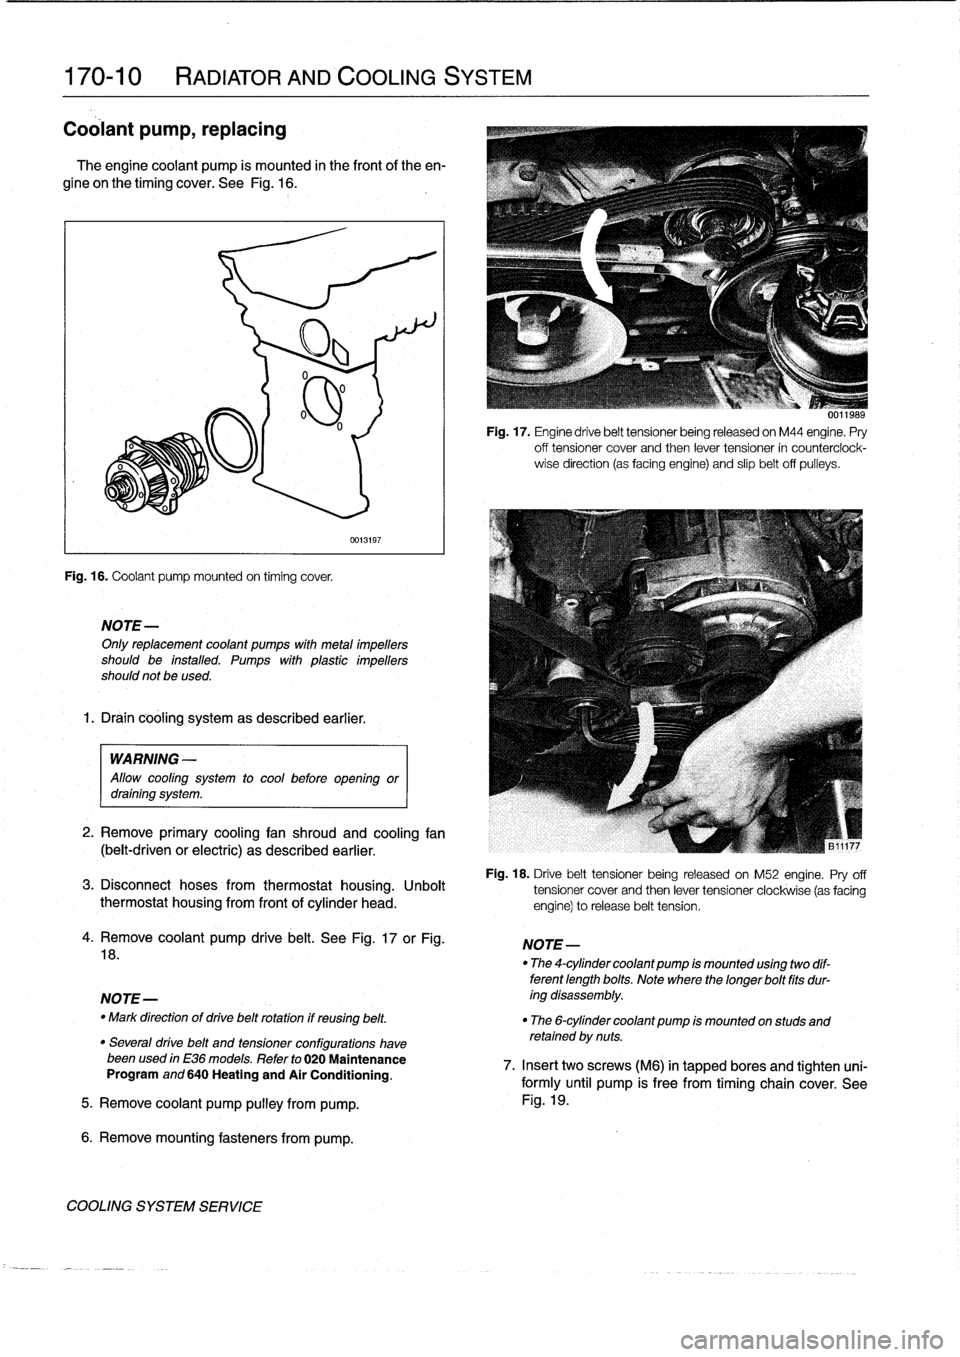 BMW 323i 1998 E36 Workshop Manual 
170-10

	

RADIATOR
AND
COOLING
SYSTEM

Coolant
pump,
replacing

The
engine
coolant
pump
is
mounted
in
the
frontof
the
en-

gine
on
the
timing
cover
.
See
Fig
.
16
.

Fig
.
16
.
Coolant
pump
mounted
